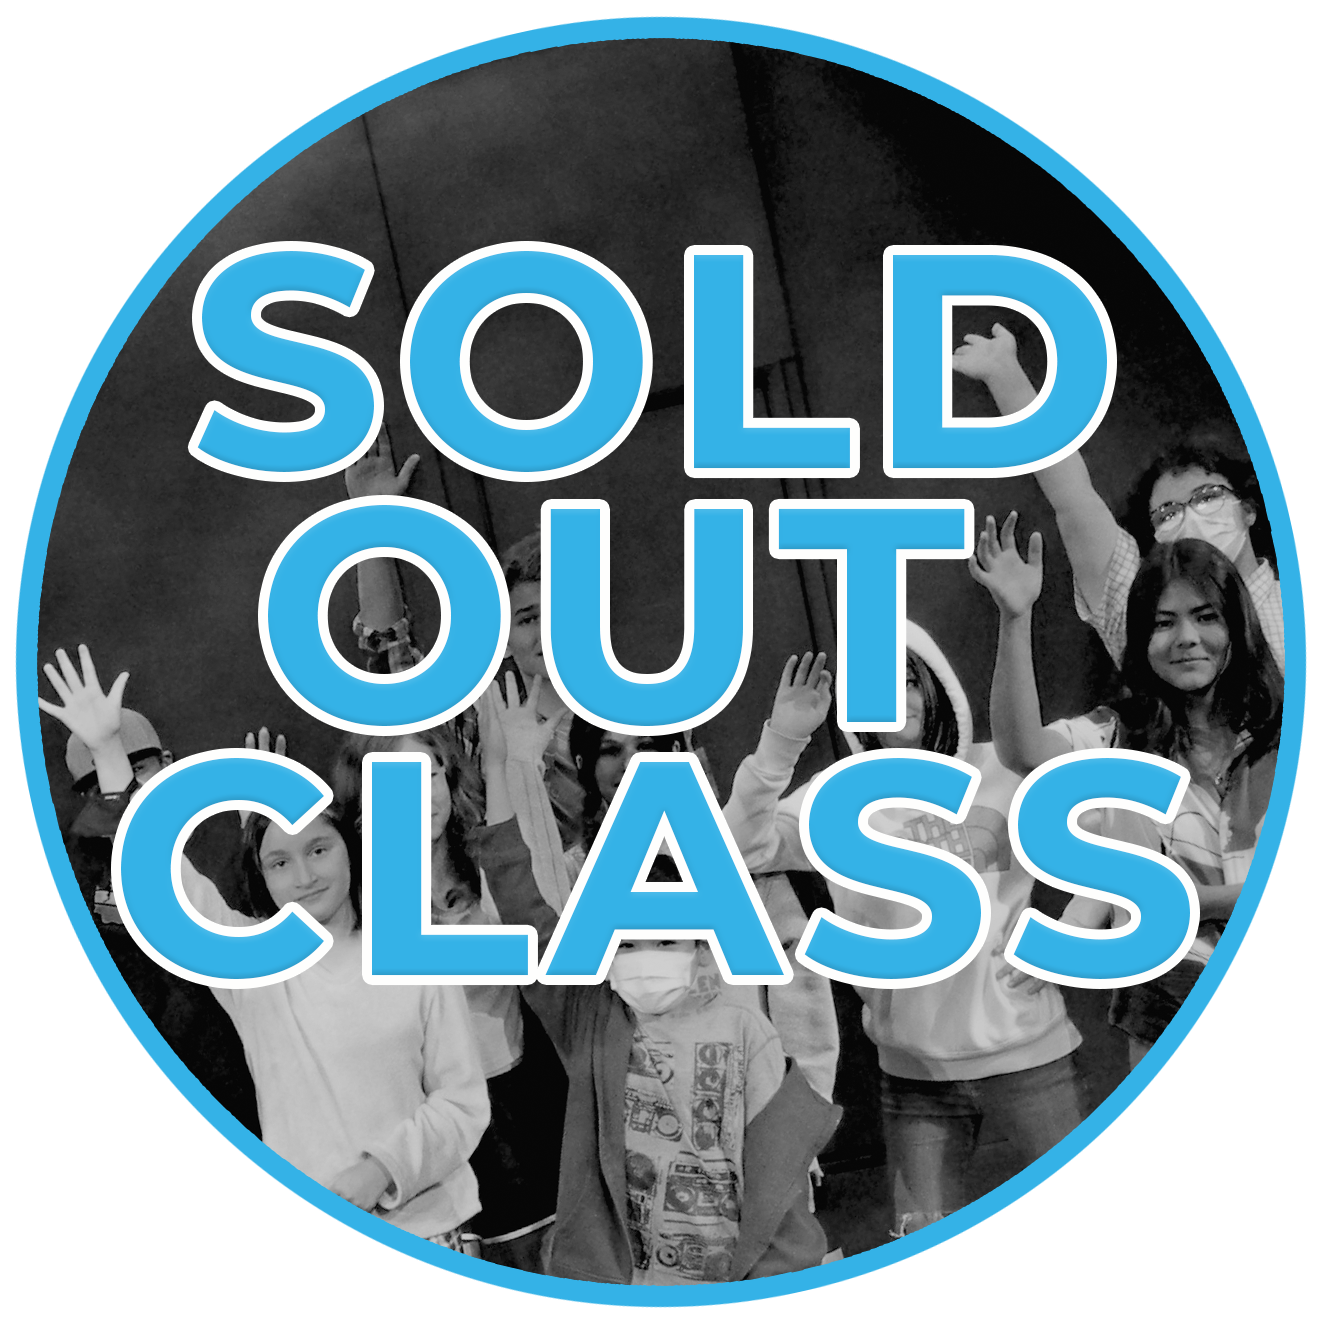 Sold out class